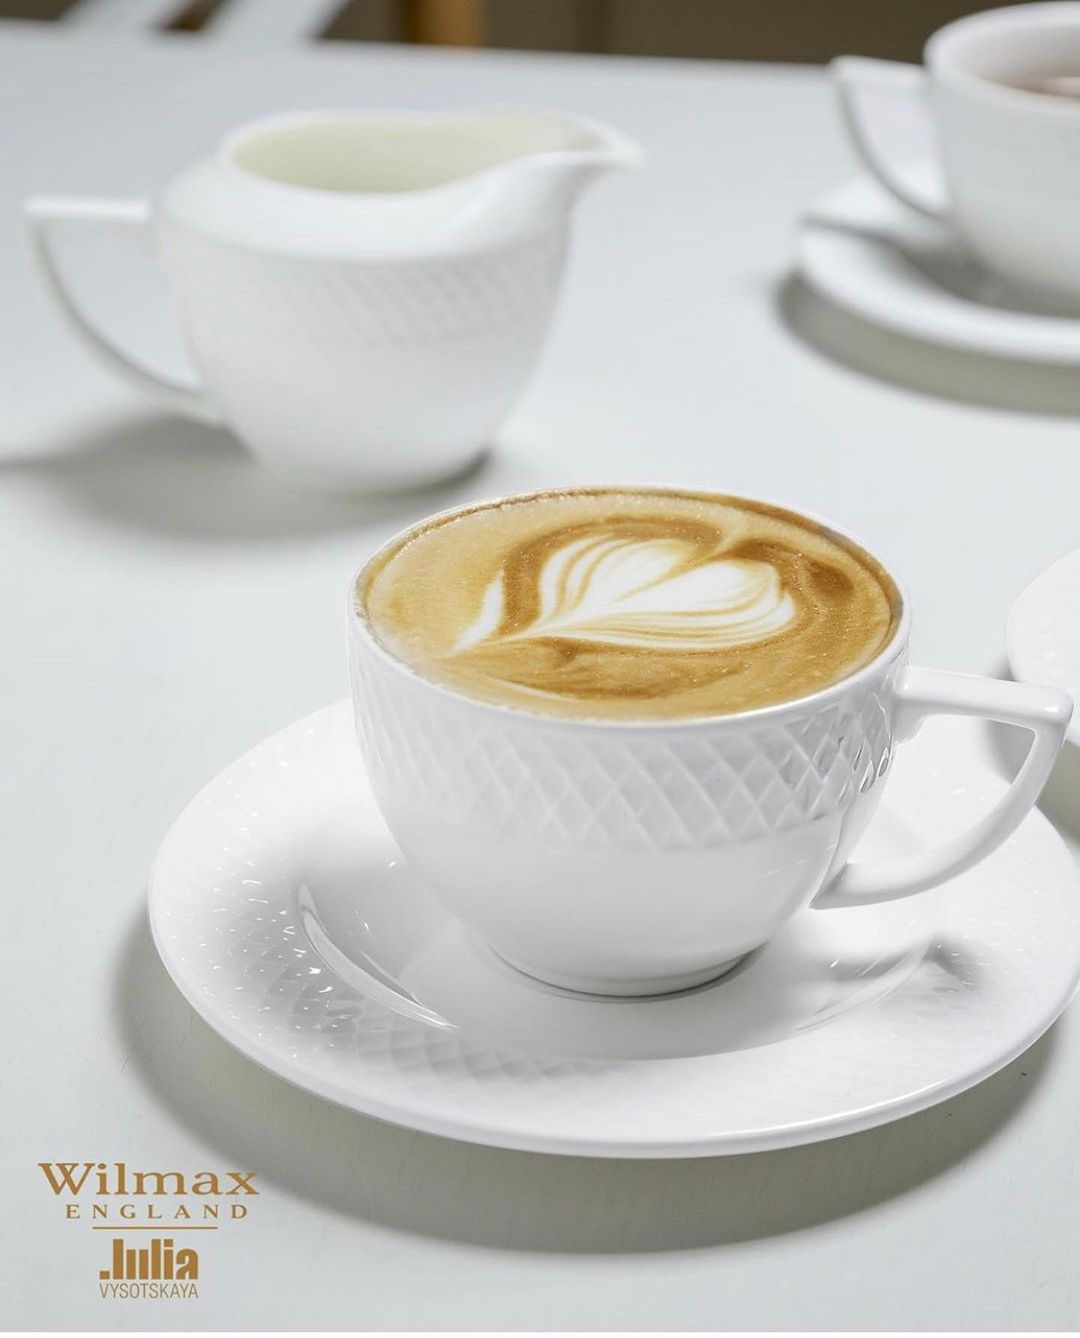 White 6 Oz Cappuccino Cup & 5.5" inch Saucer Set Of 6 - Perfect for Everyday Use, Goodies N Stuff